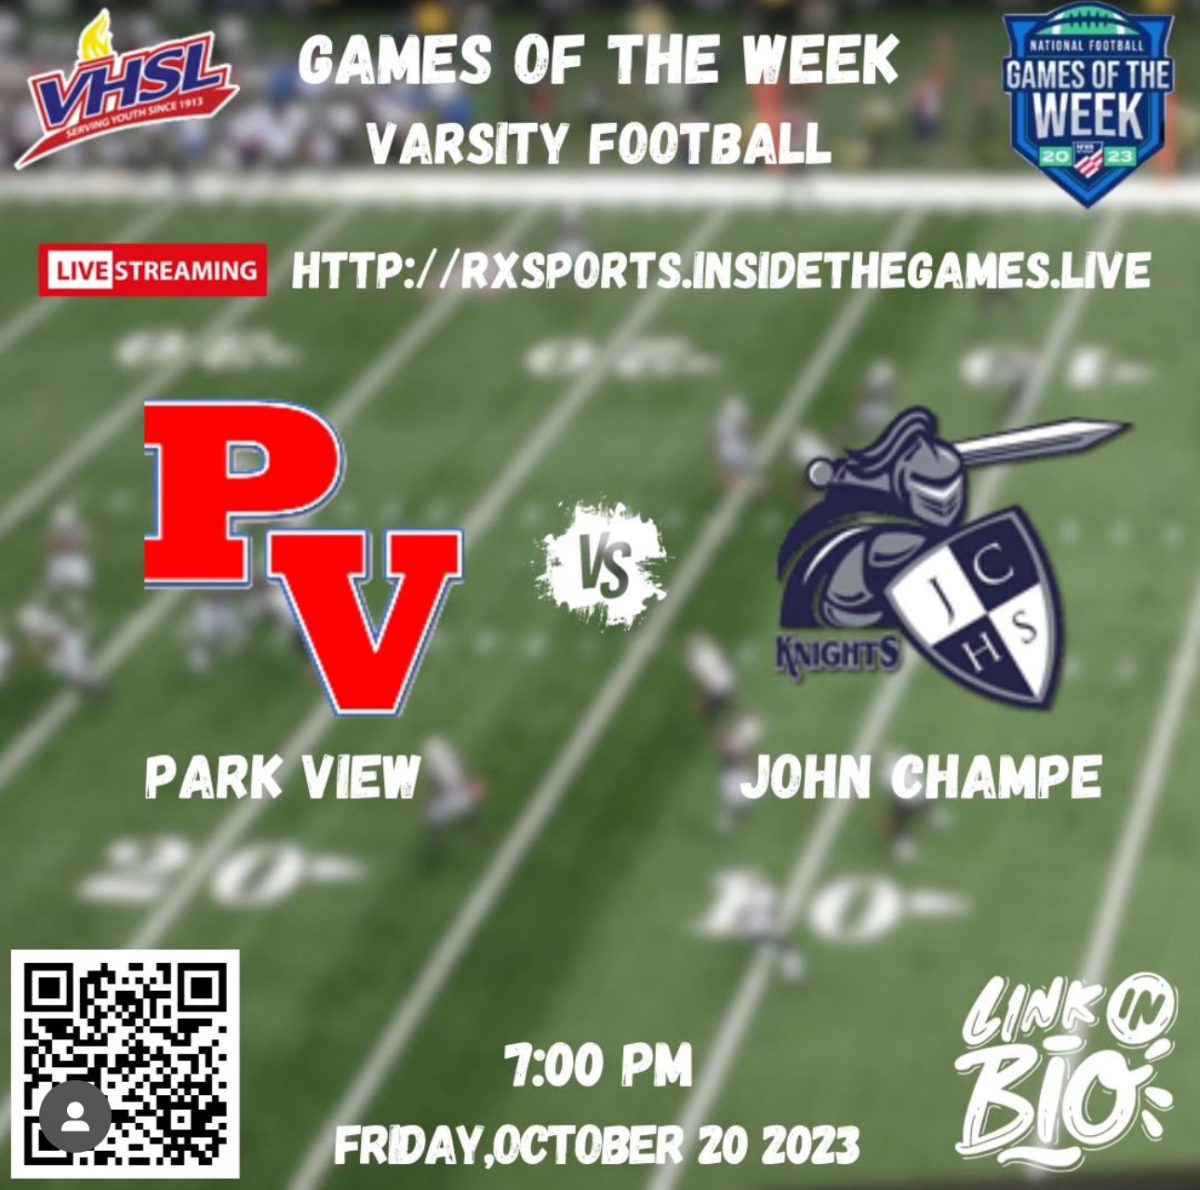 The Virginia High School League is posting updates about the game on their instagram. They posted the graphic to highlight the exciting match up between the two schools. 